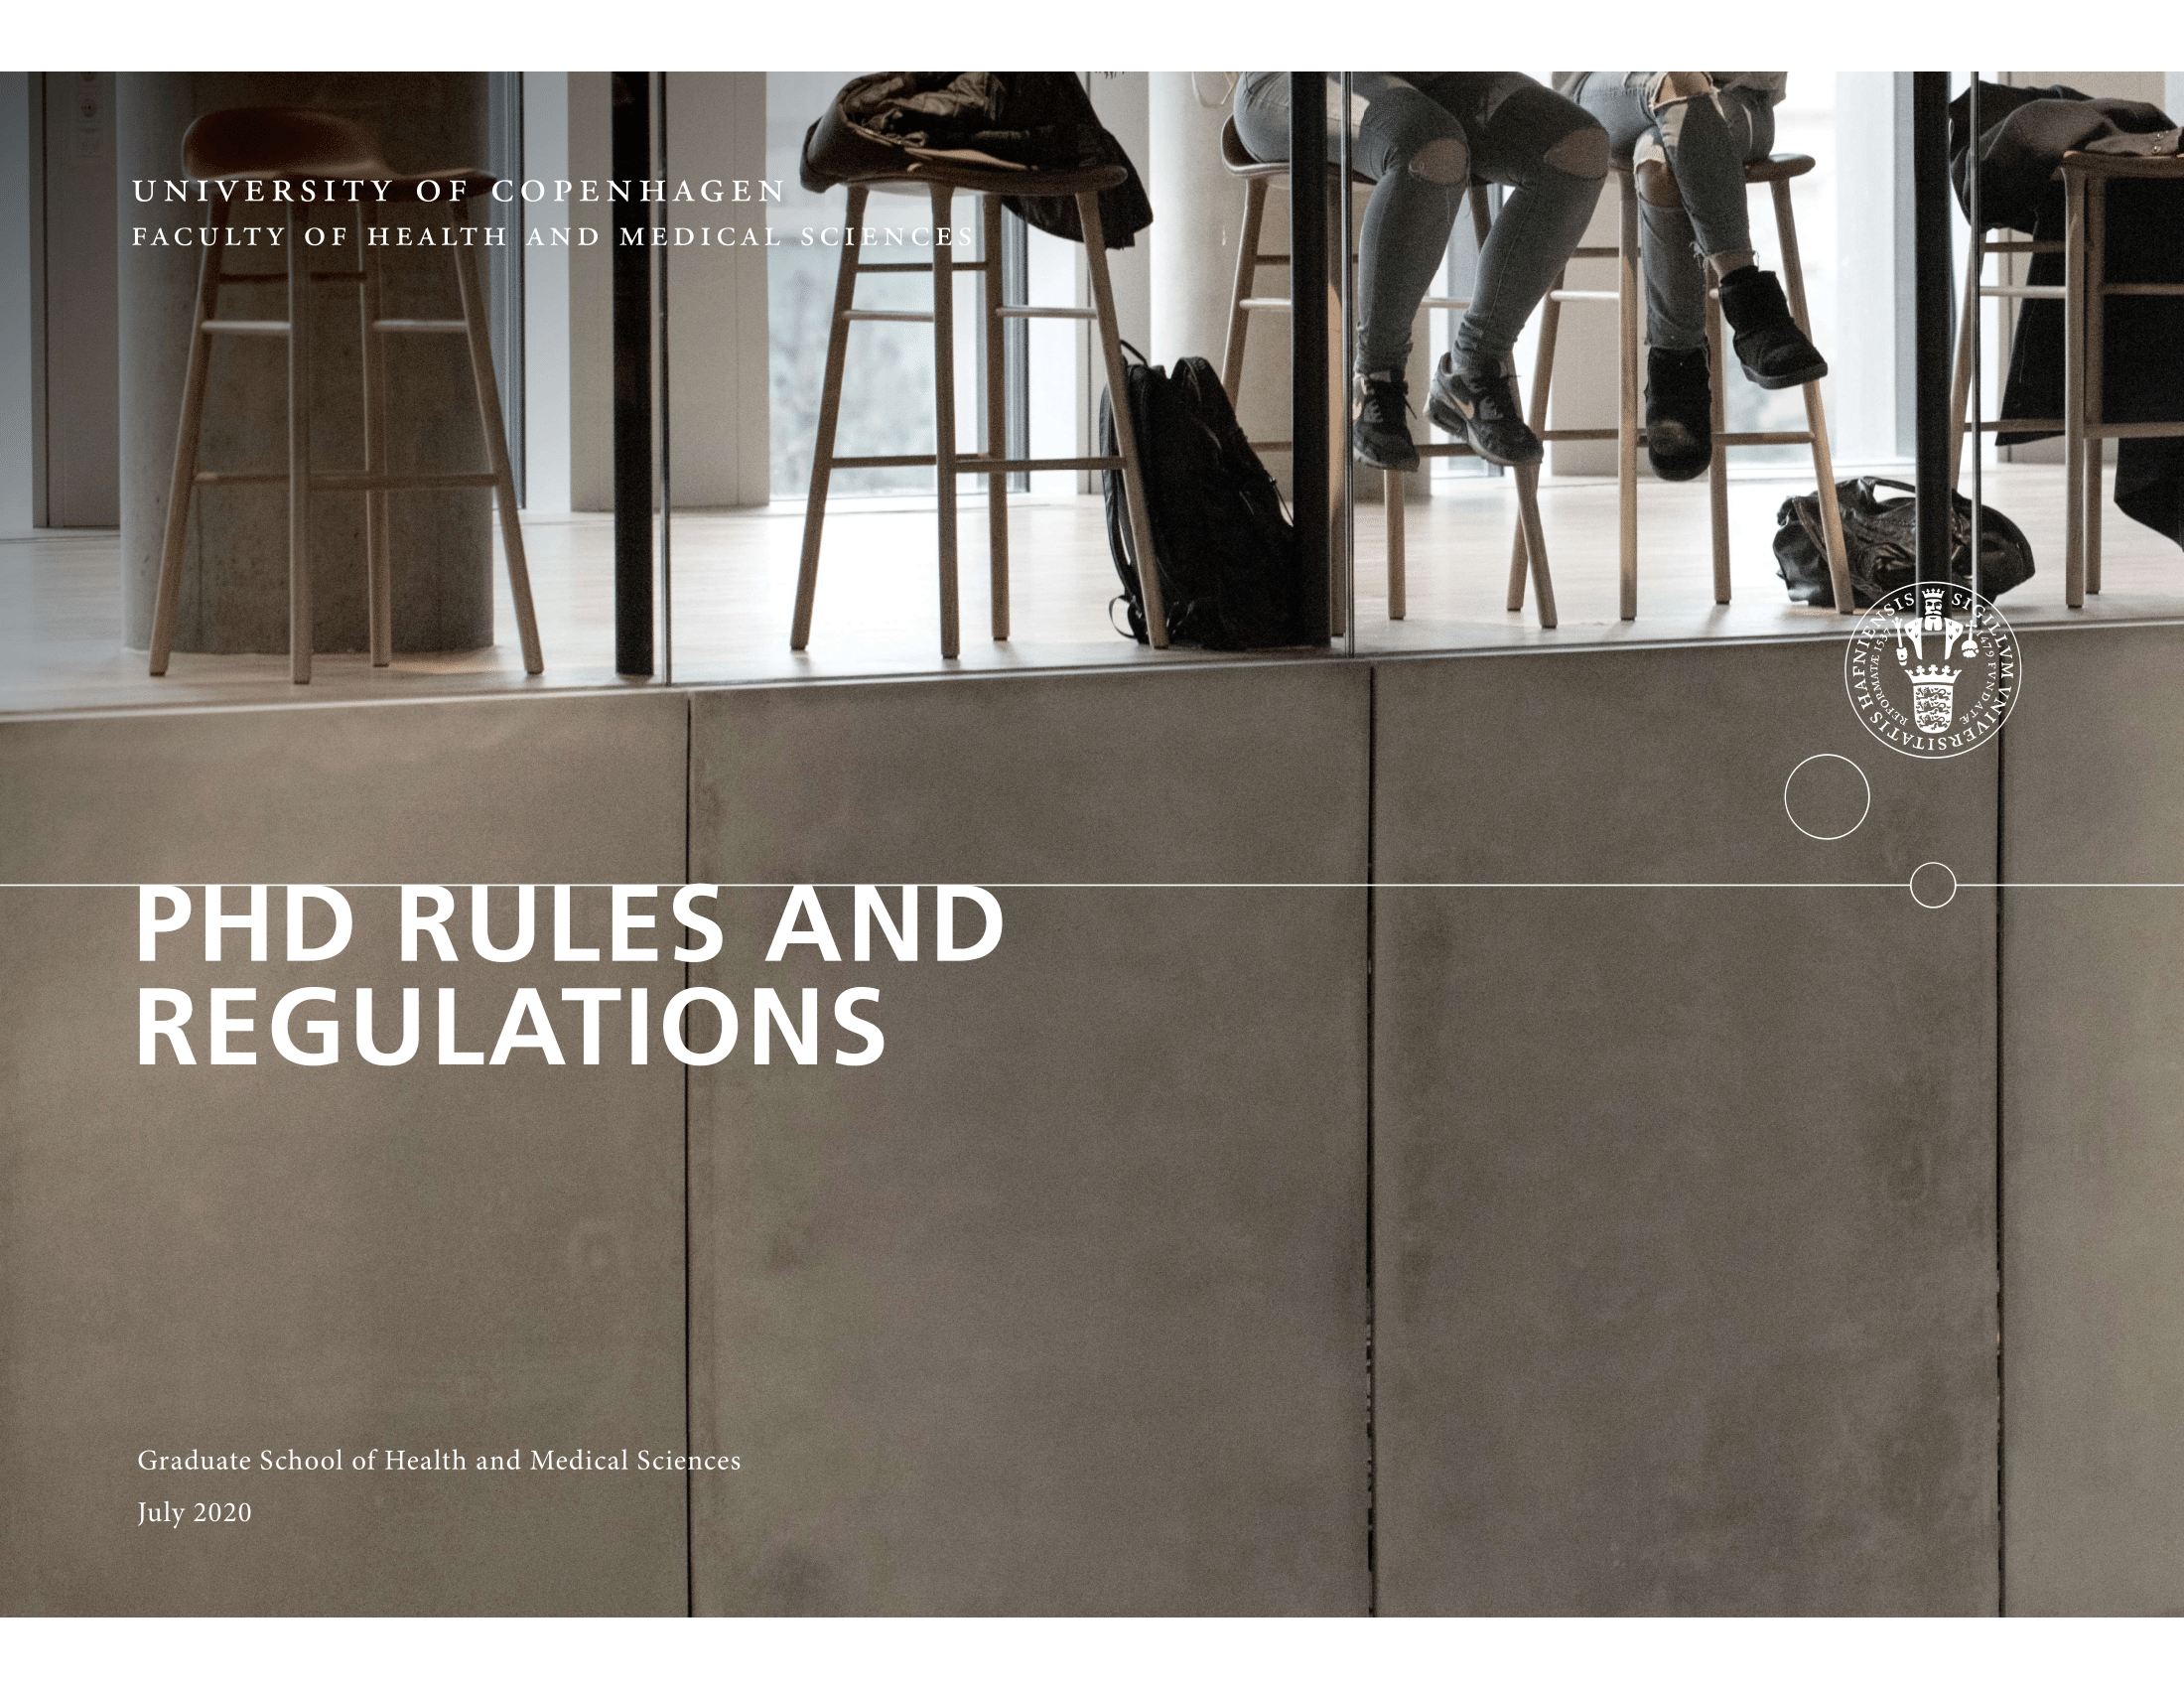 Link to PDF concerning PhD rules and guidelines at UCPH and SUND